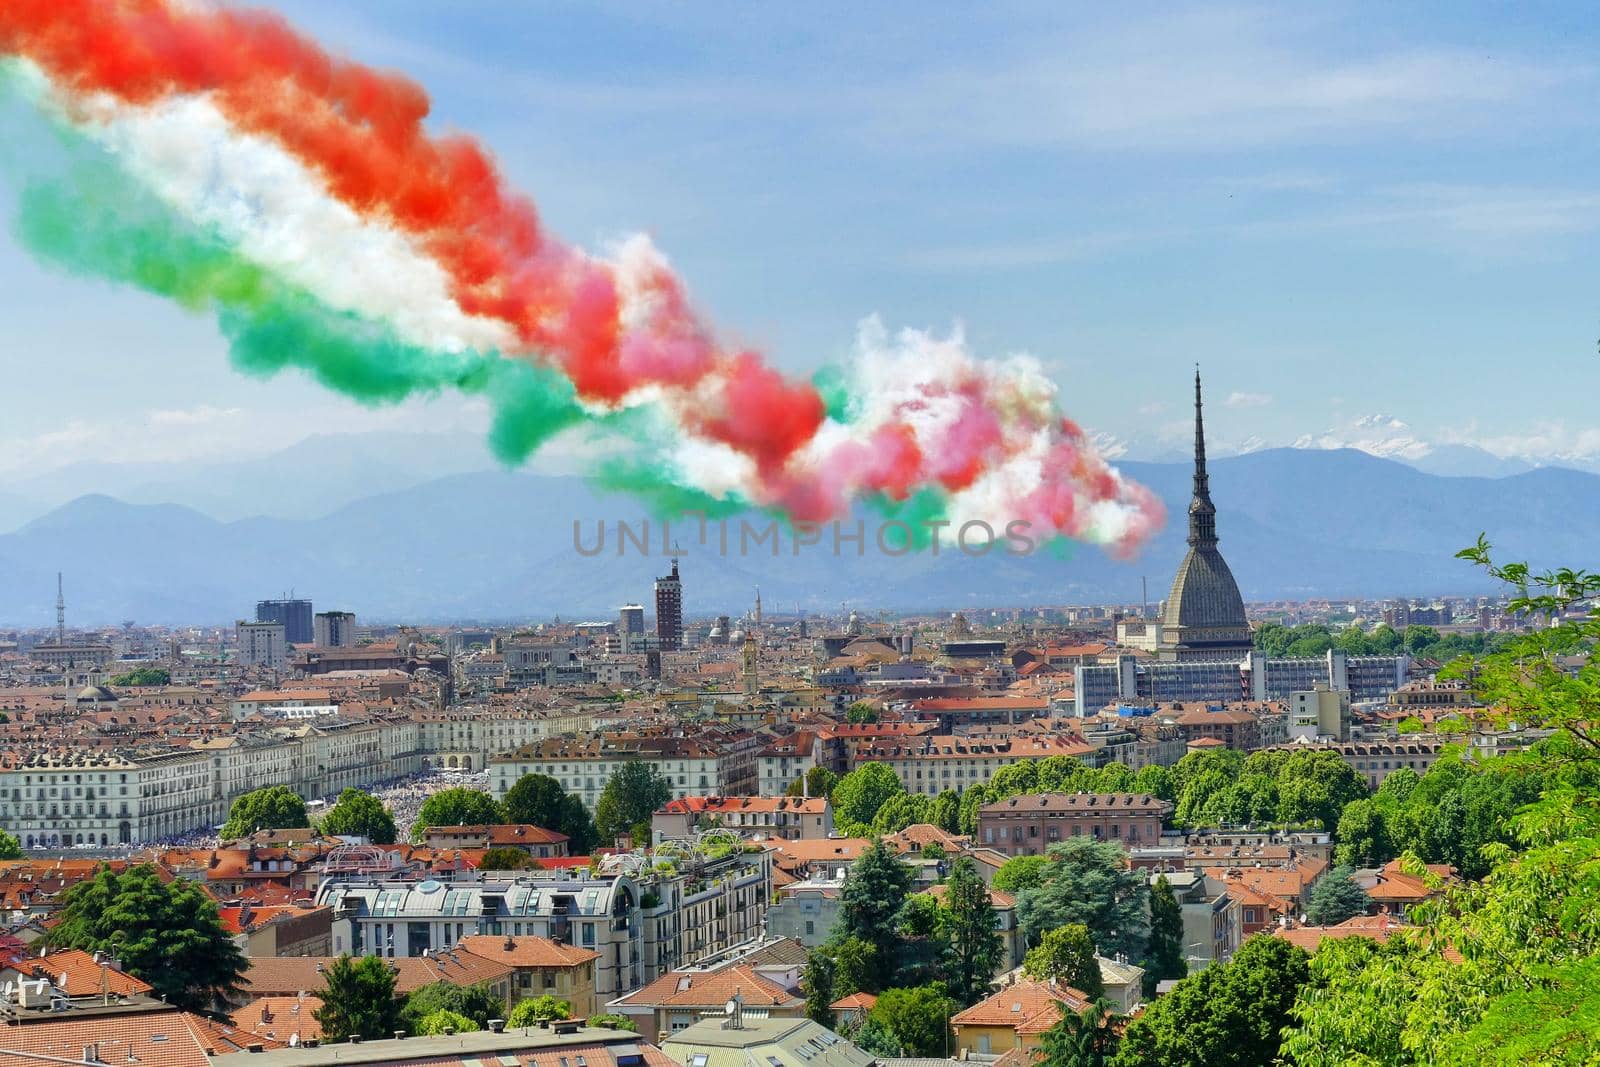 Acrobatic squad "Frecce Tricolori" flying over the city Turin Italy May 25 2020 by lemar